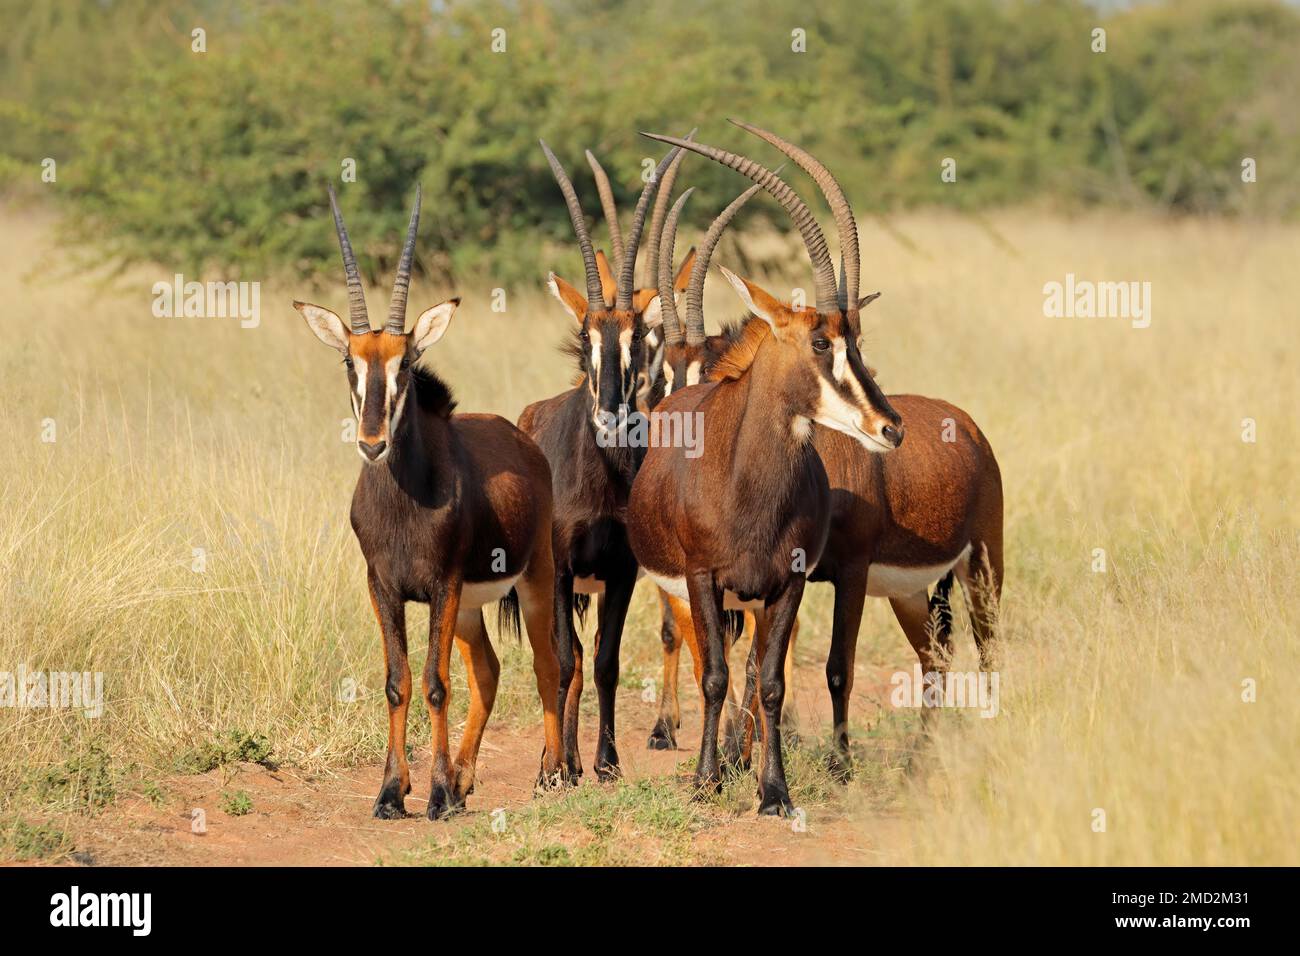 A group of sable antelopes (Hippotragus niger) in natural habitat, South Africa Stock Photo